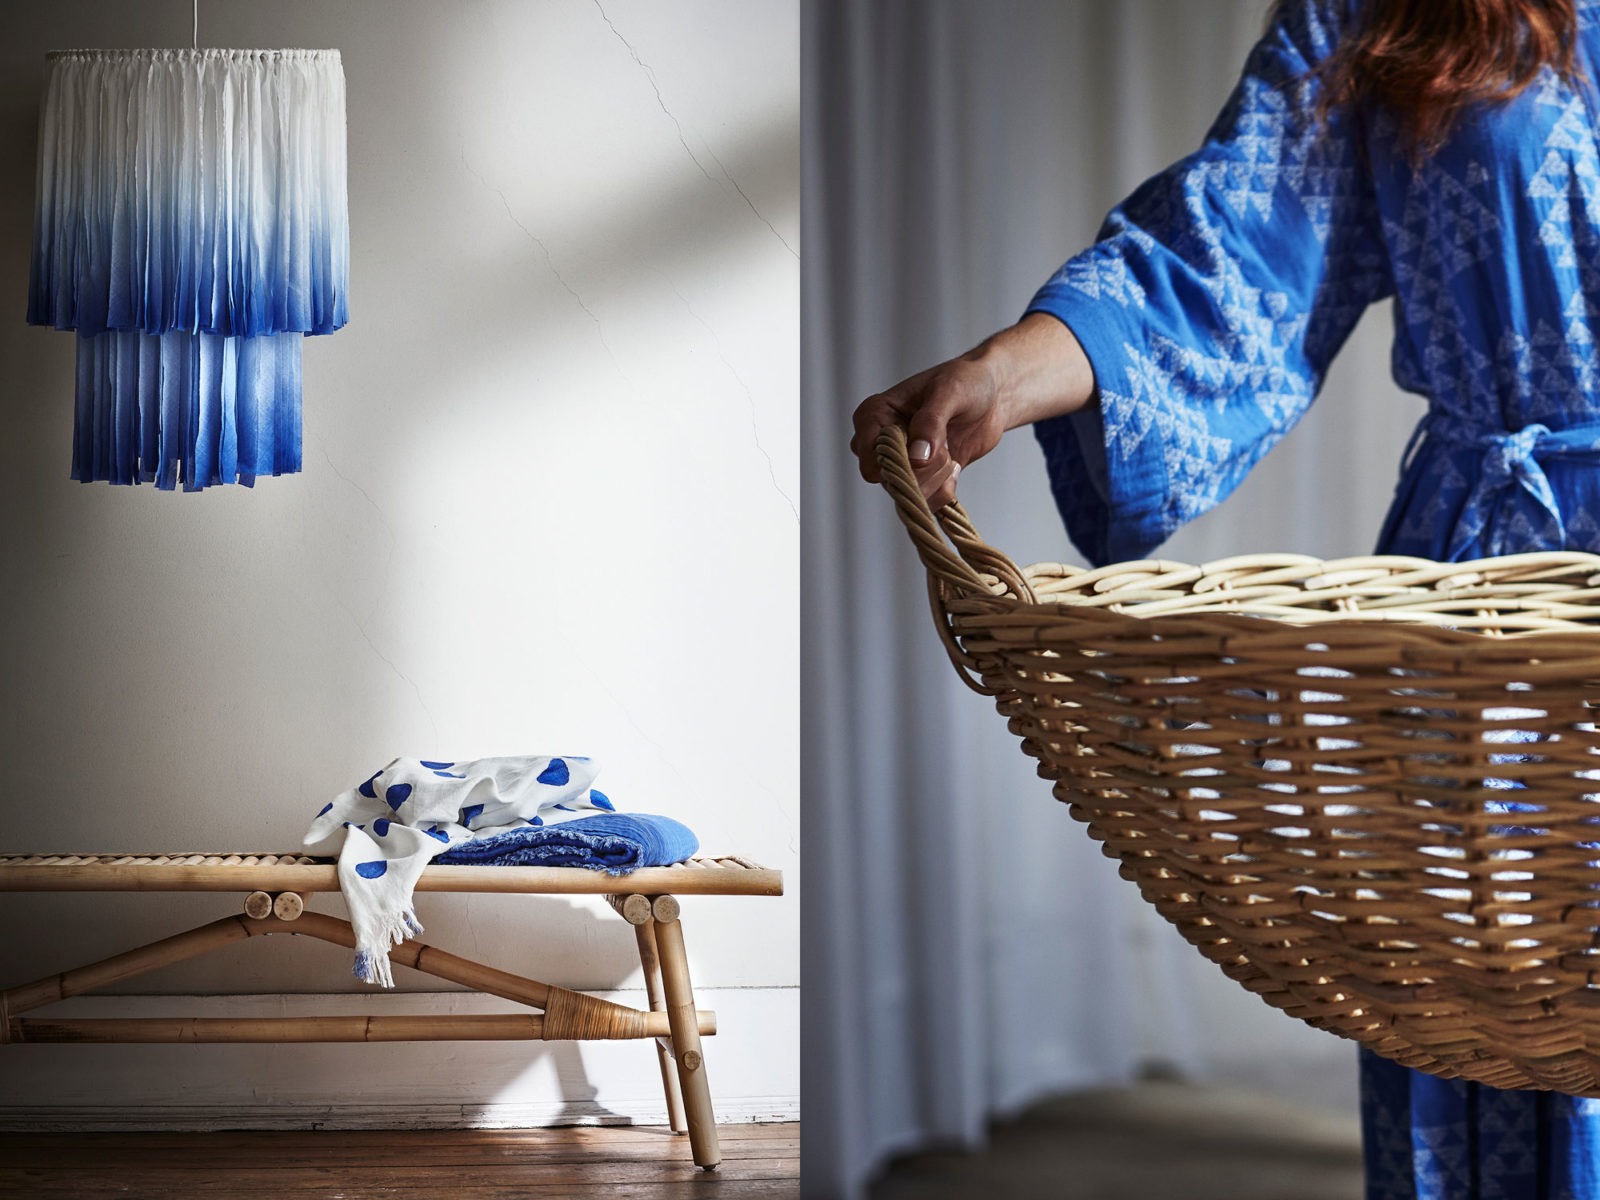 Pendant lamp with blue-white batique-coloured textiles, above rattan table. Woman holding wicker basket.